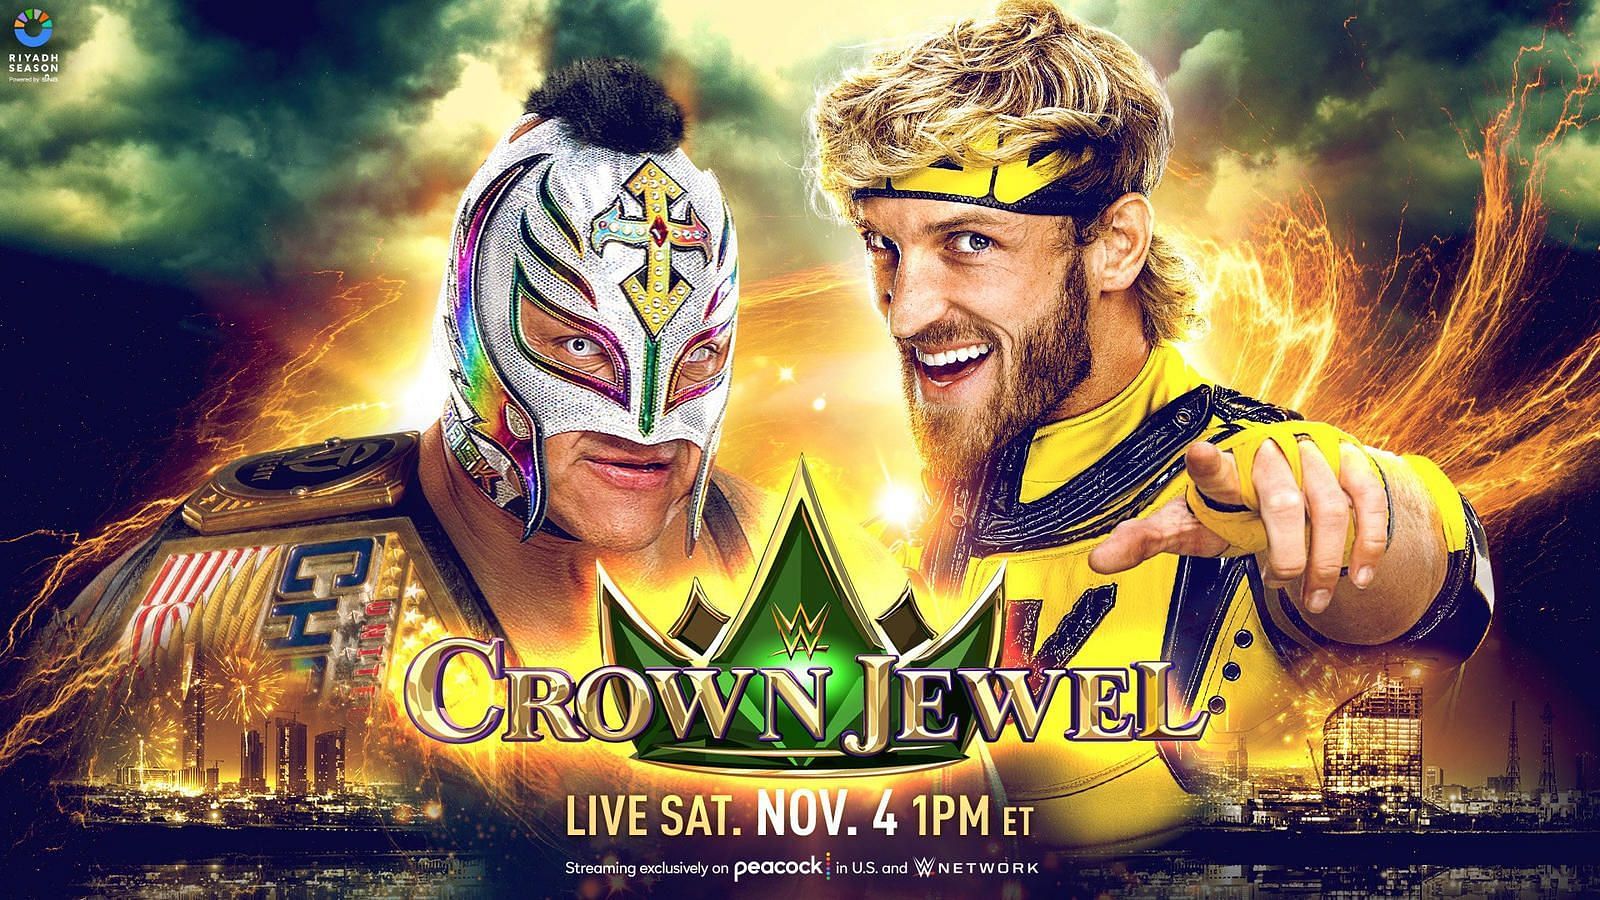 Rey Mysterio will defend his United States Championship against Logan Paul at Crown Jewel